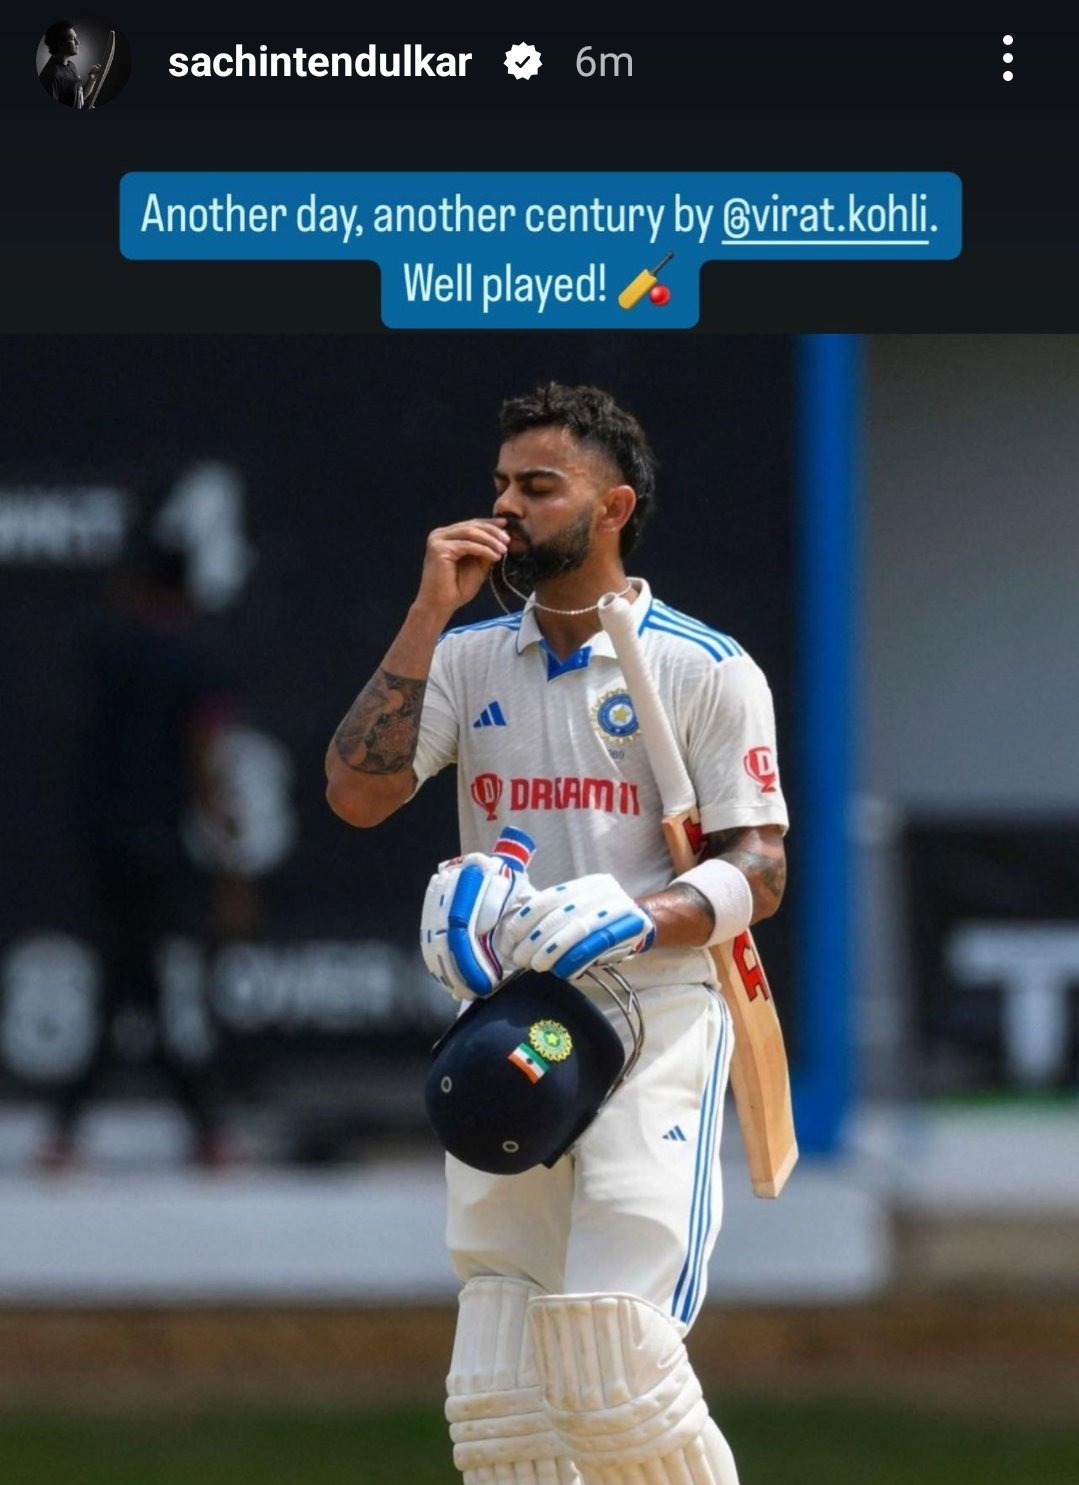 Virat completed his 29th Test century.  Meanwhile, great batsman Sachin Tendulkar wrote on his century while sharing a story for him on Instagram.